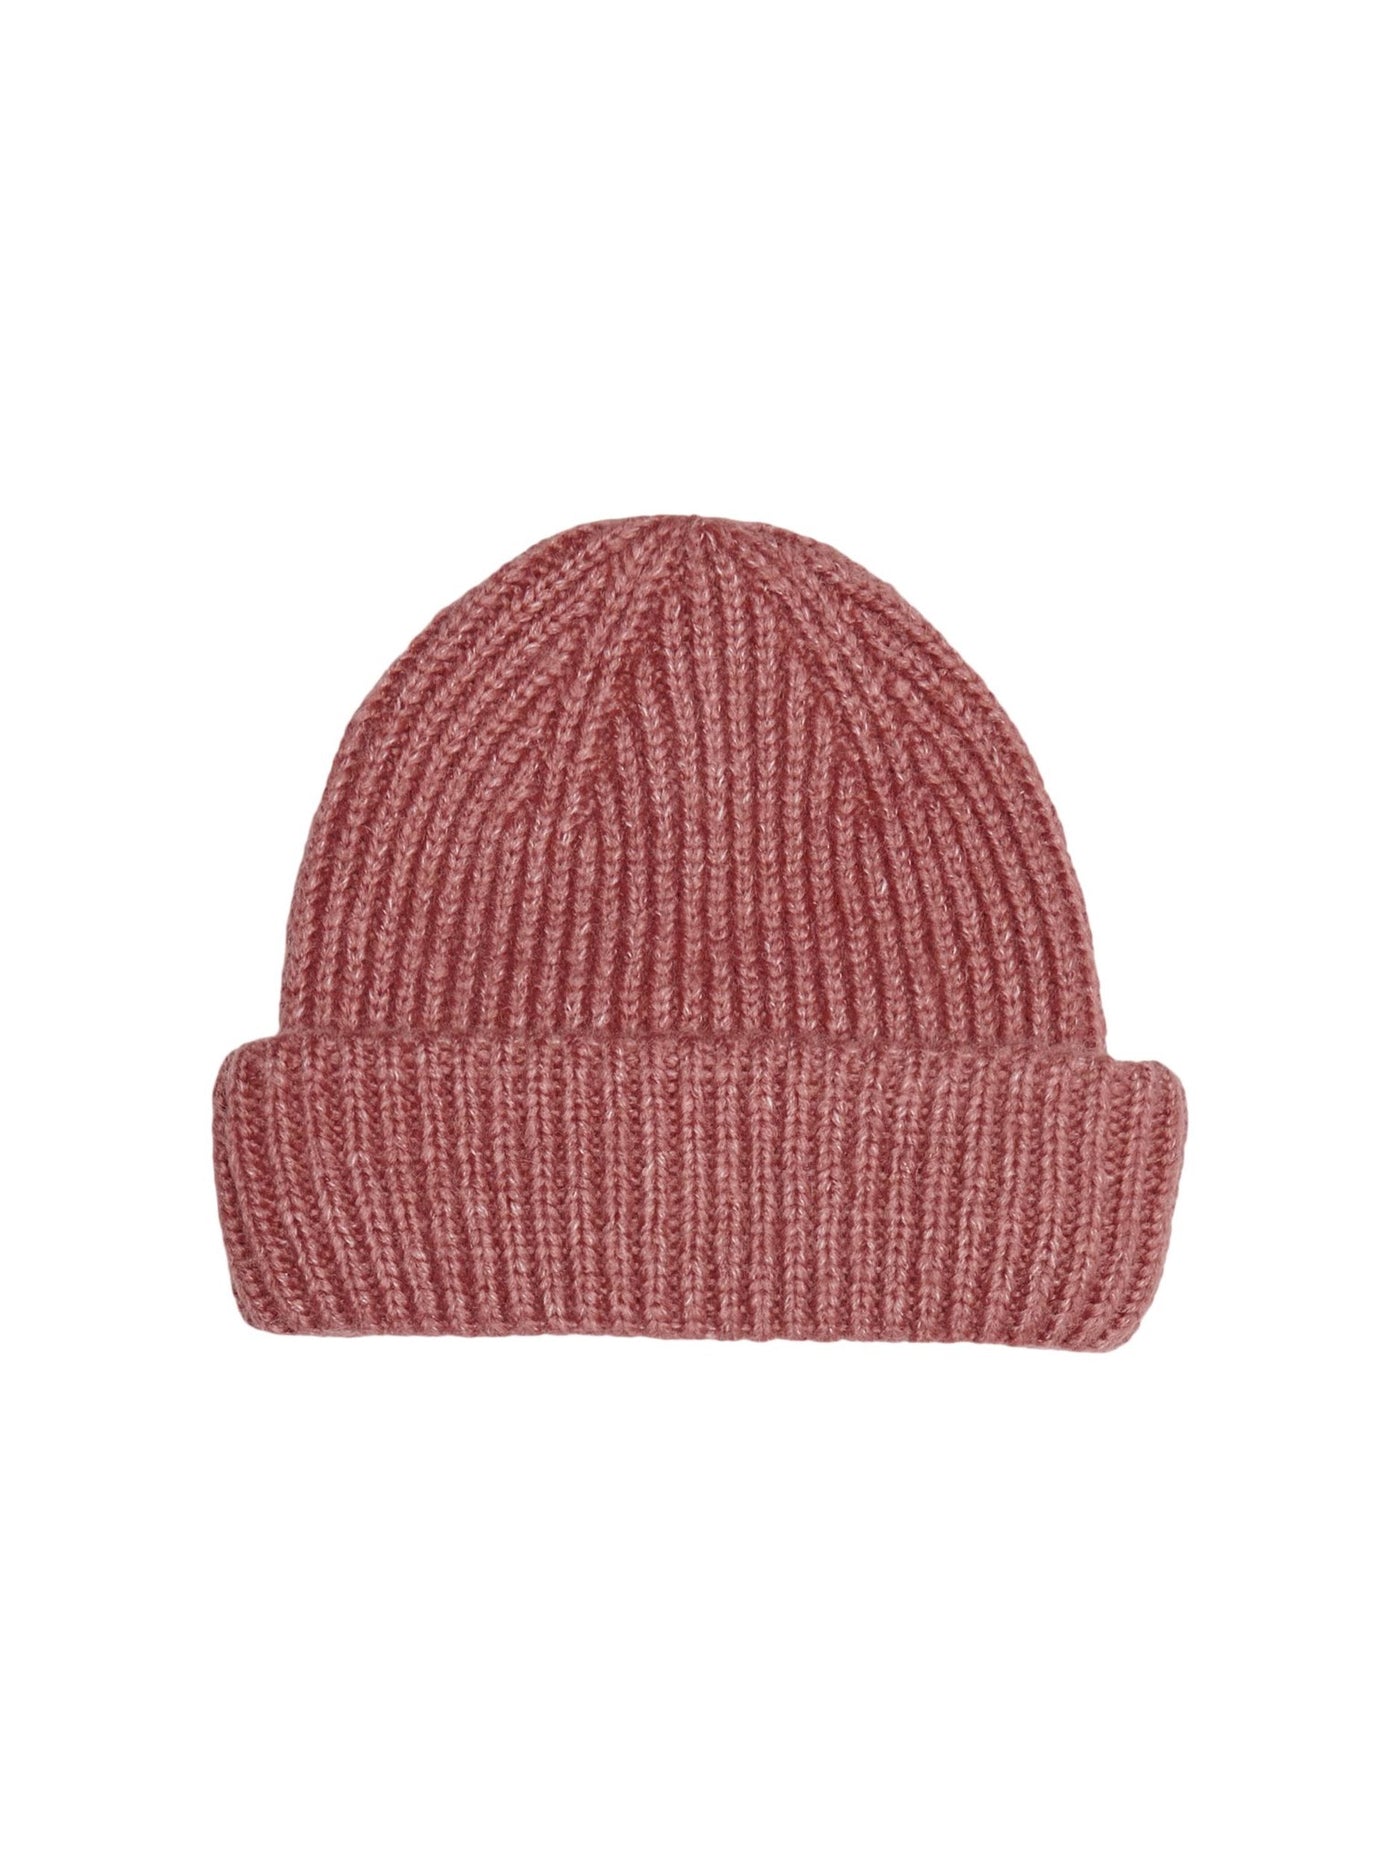 Sussy Life Strik Beanie - Canyon Rose - ONLY